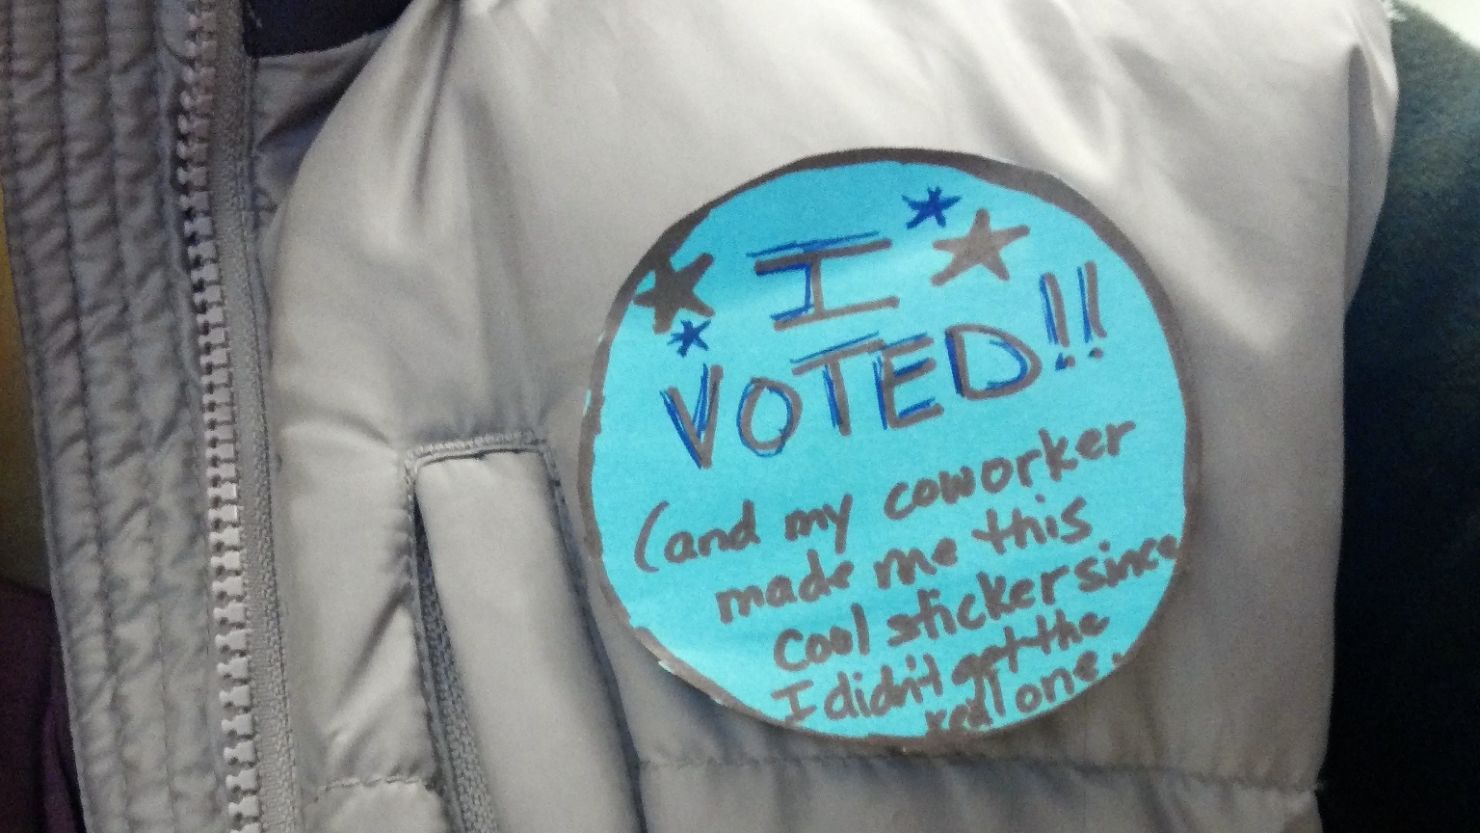 iReporter Kate Coleman, 31, of Wilmington, Delaware, shared this photo of a homemade voting sticker.